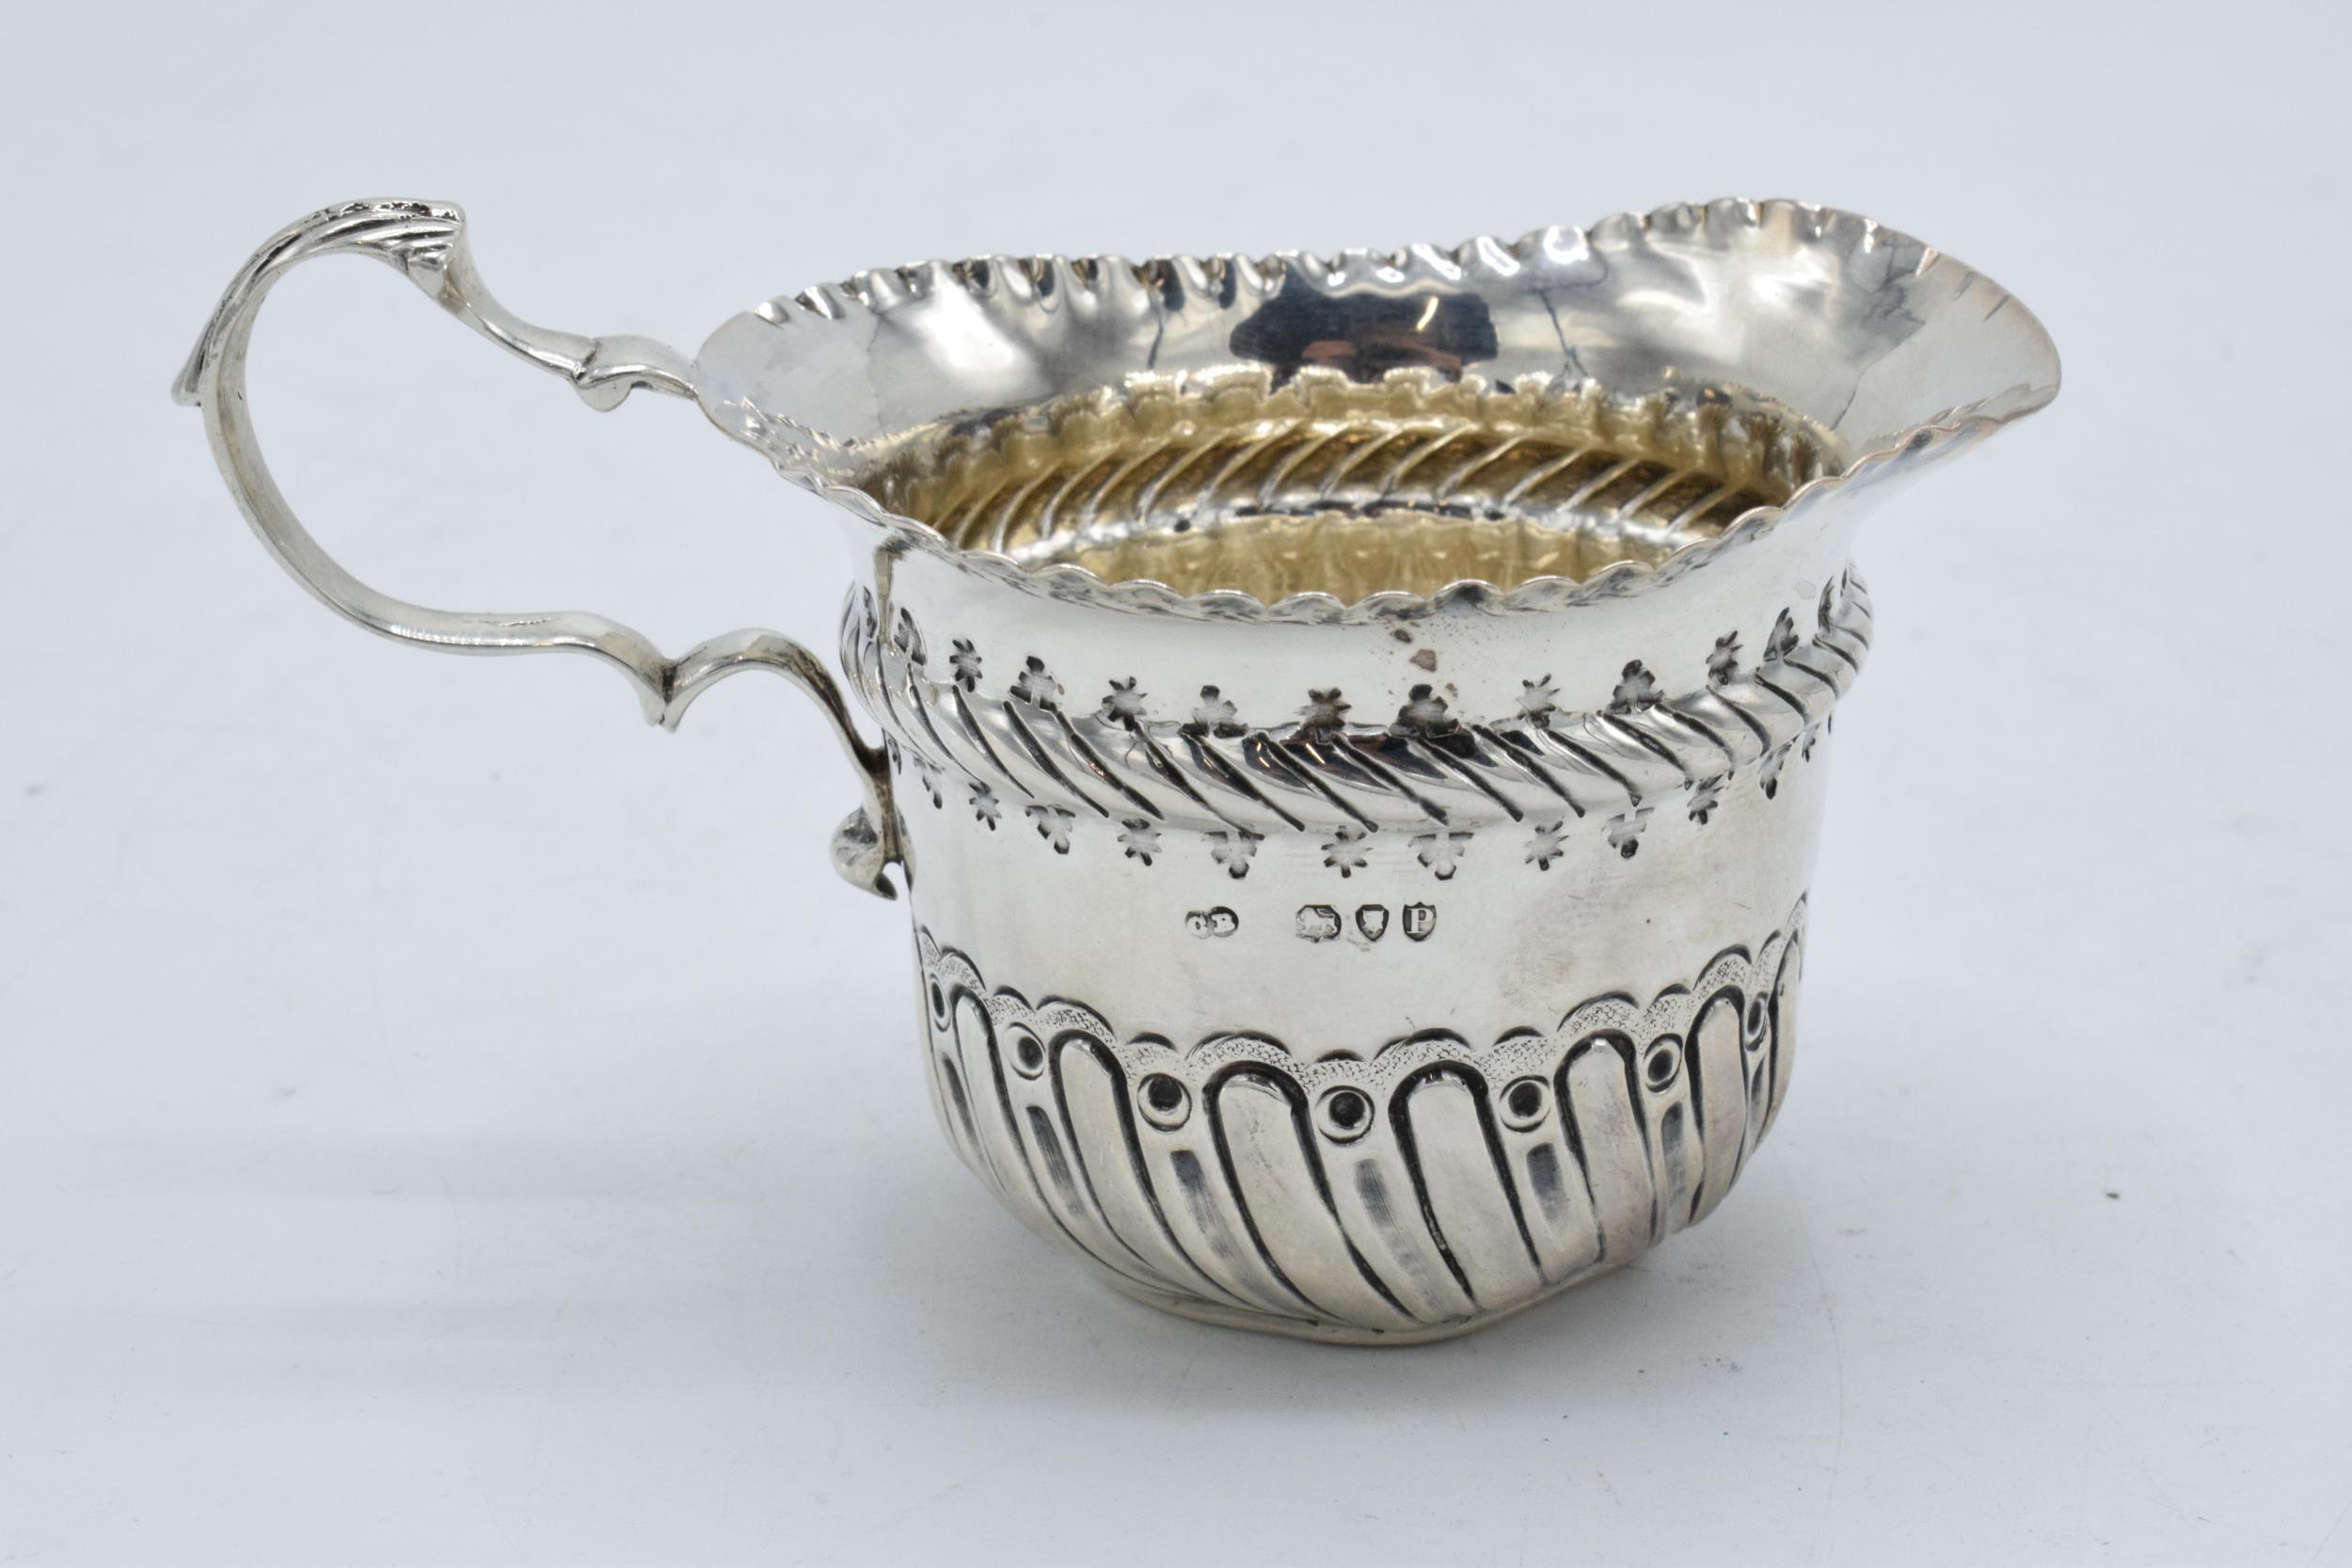 An ornate silver cream jug / sauce jug. London 1890. 53.7 grams. In good condition with some dents - Image 2 of 4